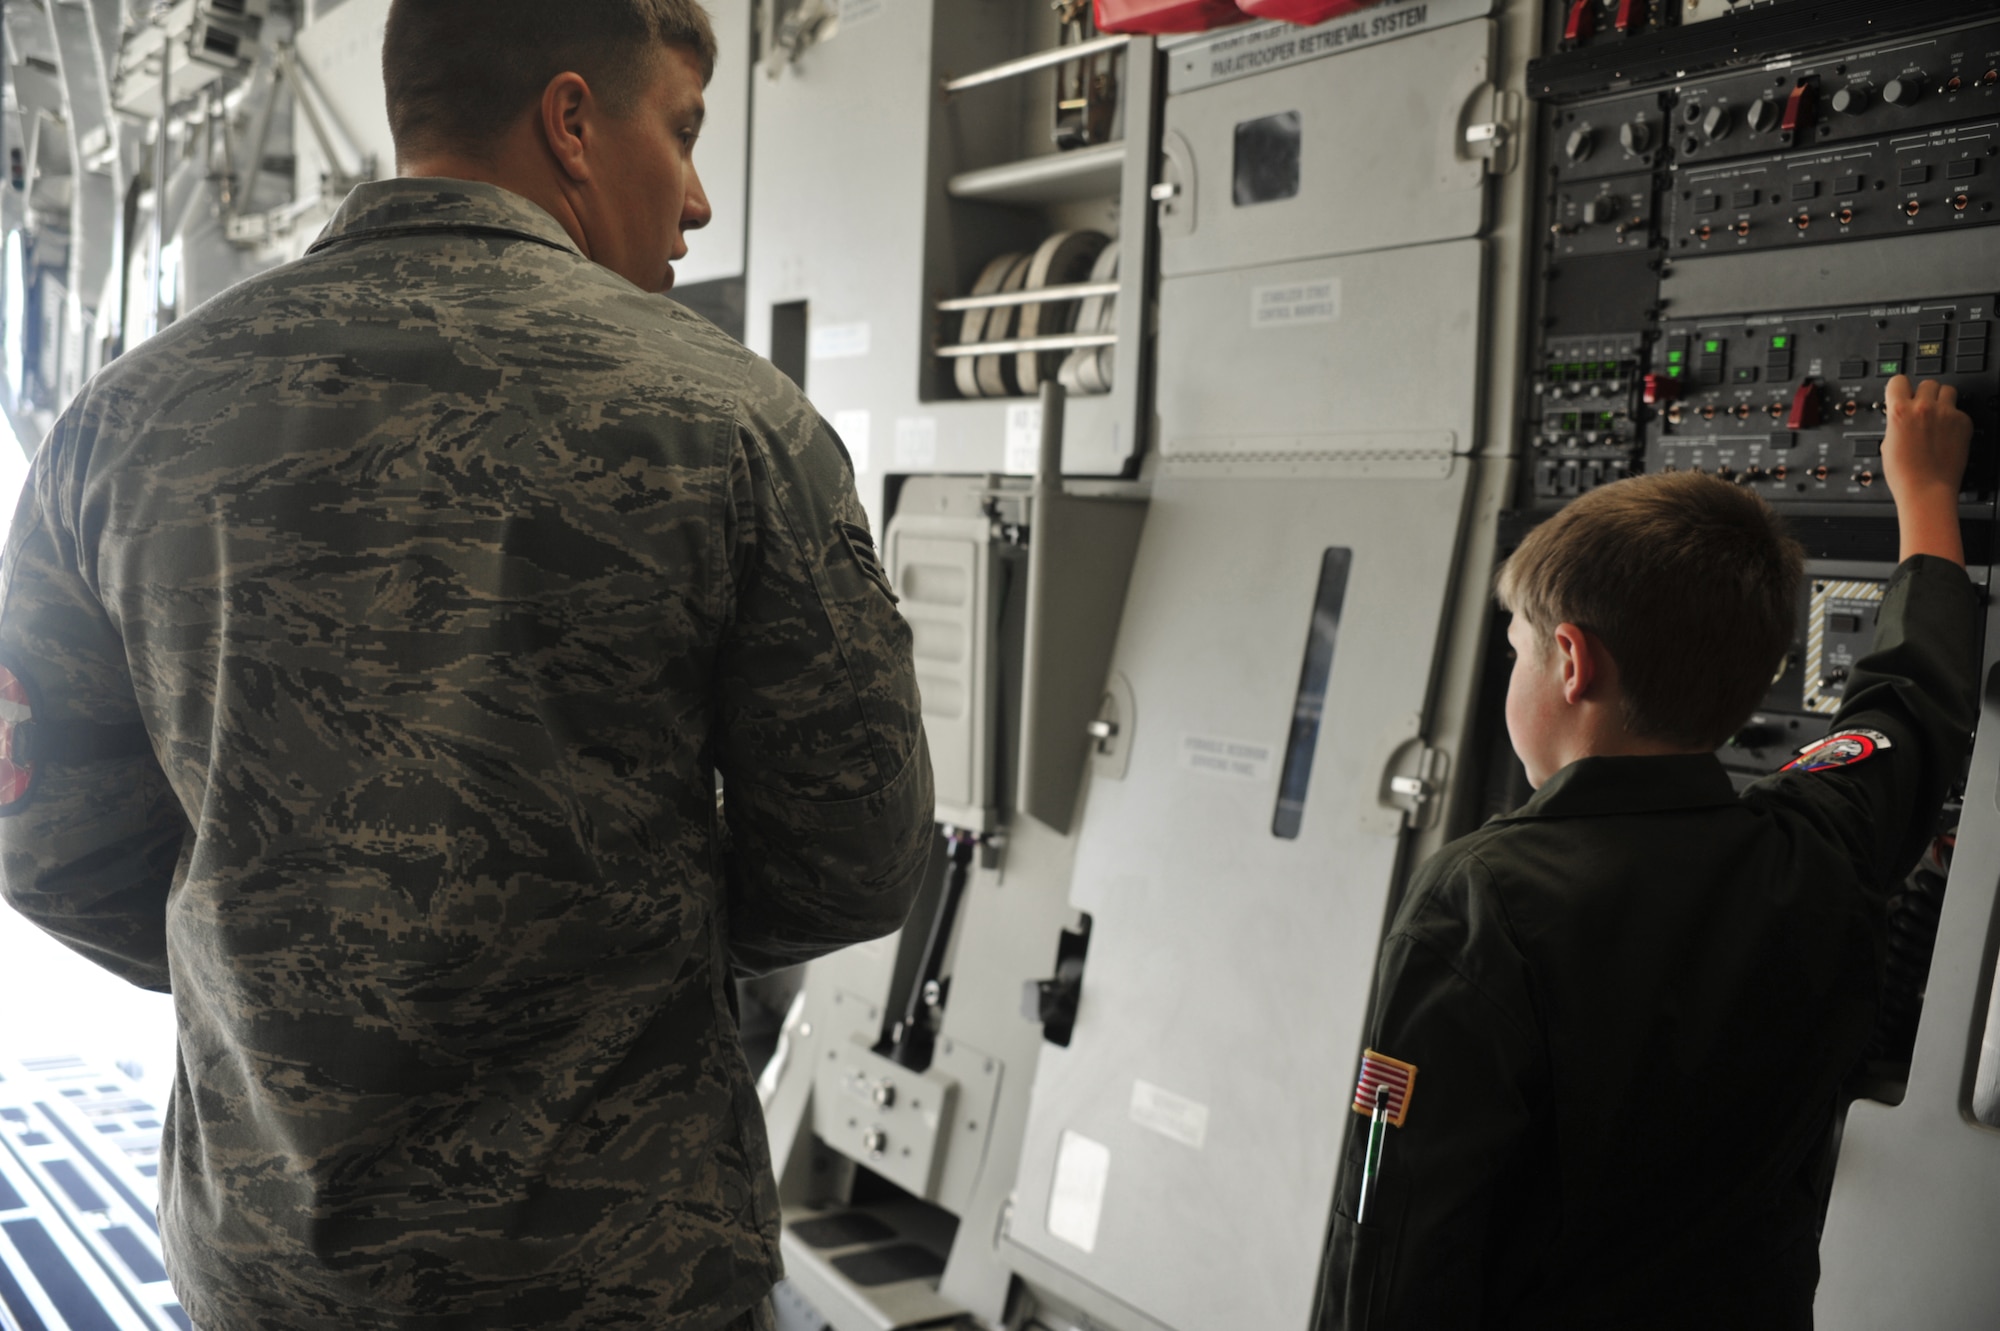 Senior Airman Stephen Lanham, 62nd Aircraft Maintenance Squadron crew chief, instructs Evan Waara, "Pilot for a Day," on how to open the ramp doors of a C-17 Globemaster III July 7 at Joint Base Lewis-McChord, Wash. Evan also had an opportunity to sit in the cockpit of the C-17. (Air Force photo/Staff Sgt. Frances Kriss)